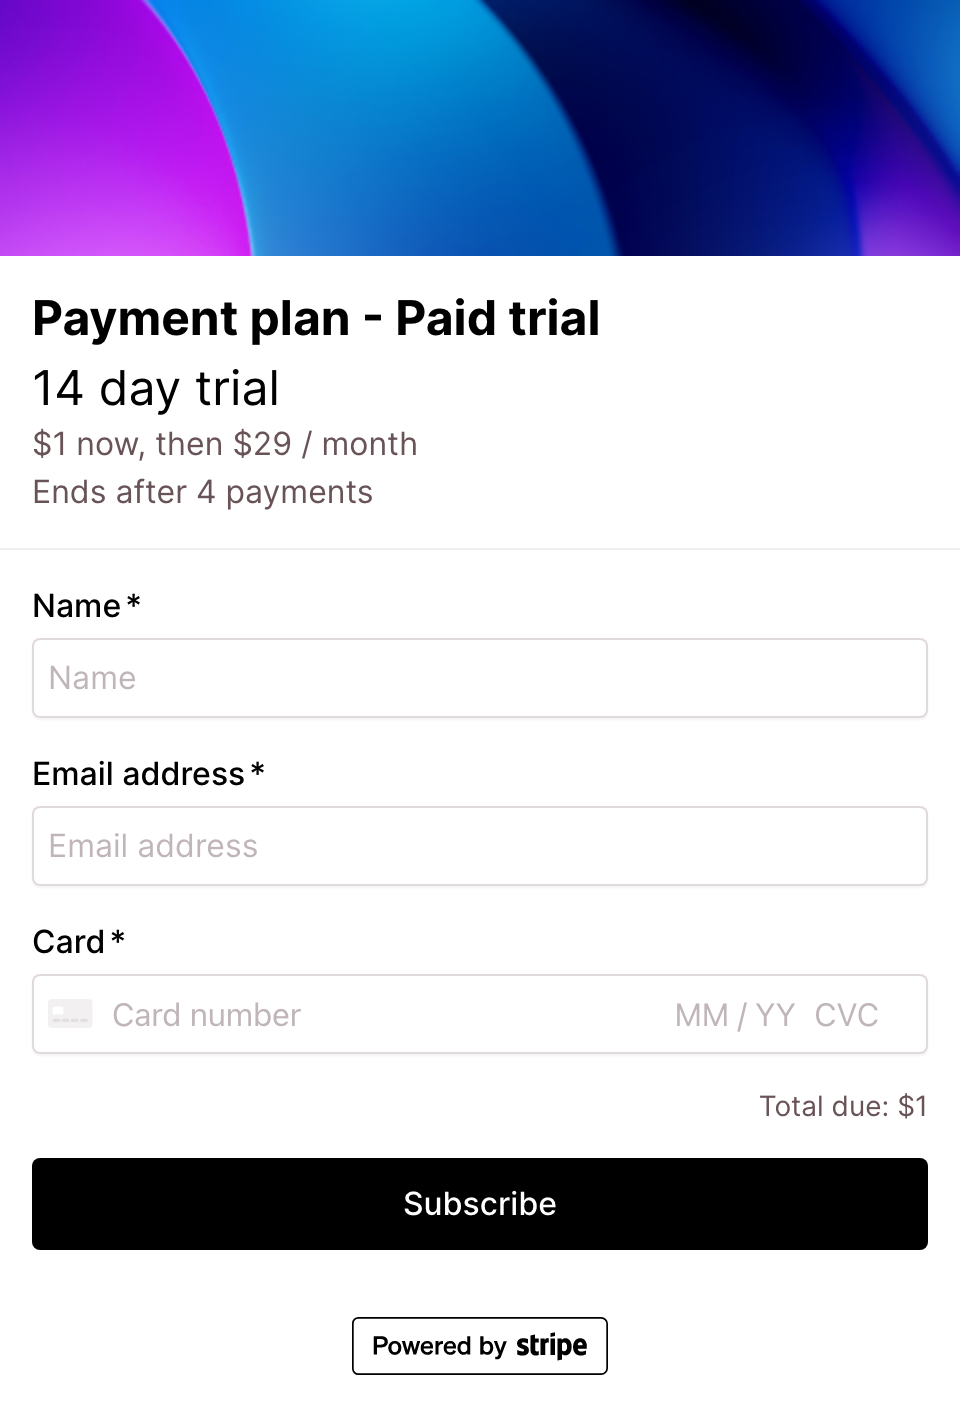 Paid trial payment plan checkout form